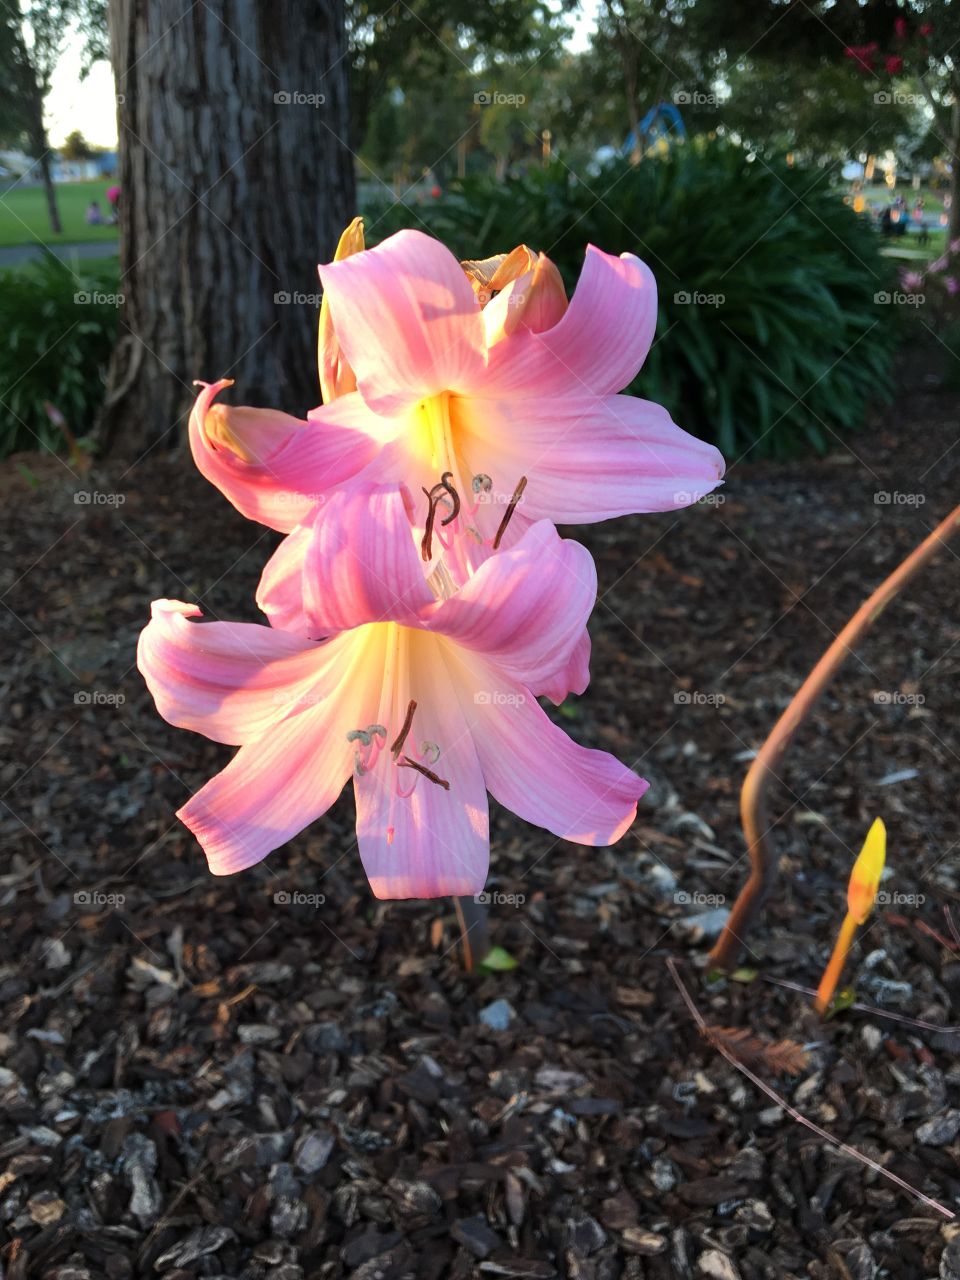 A bunch of vibrant pink flowers at sunset 